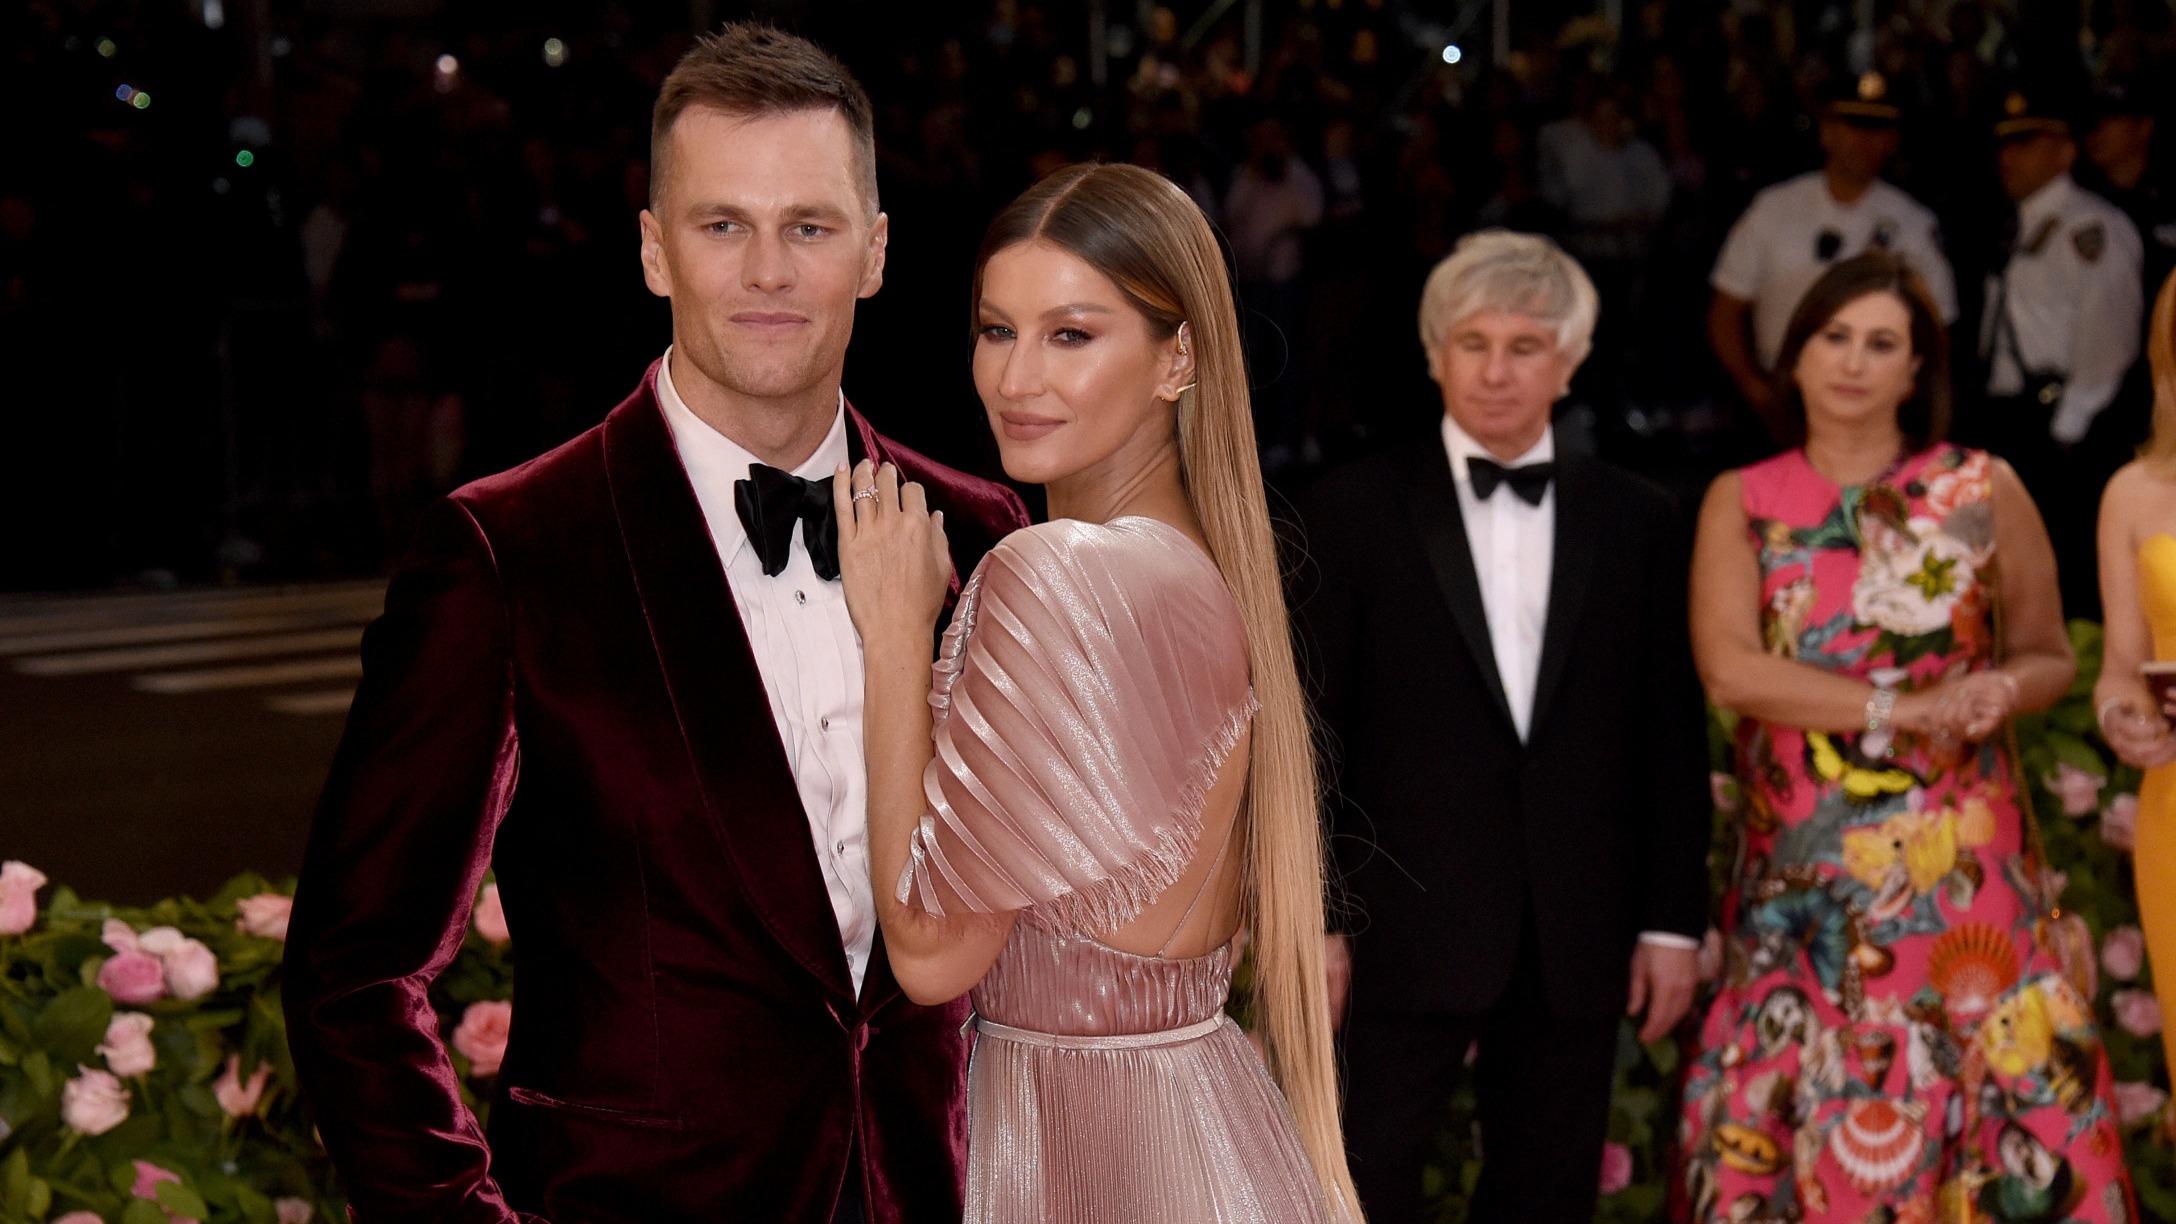 Tom Brady and Gisele Bündchen Have Not Reconciled Despite Her Return to Florida photo